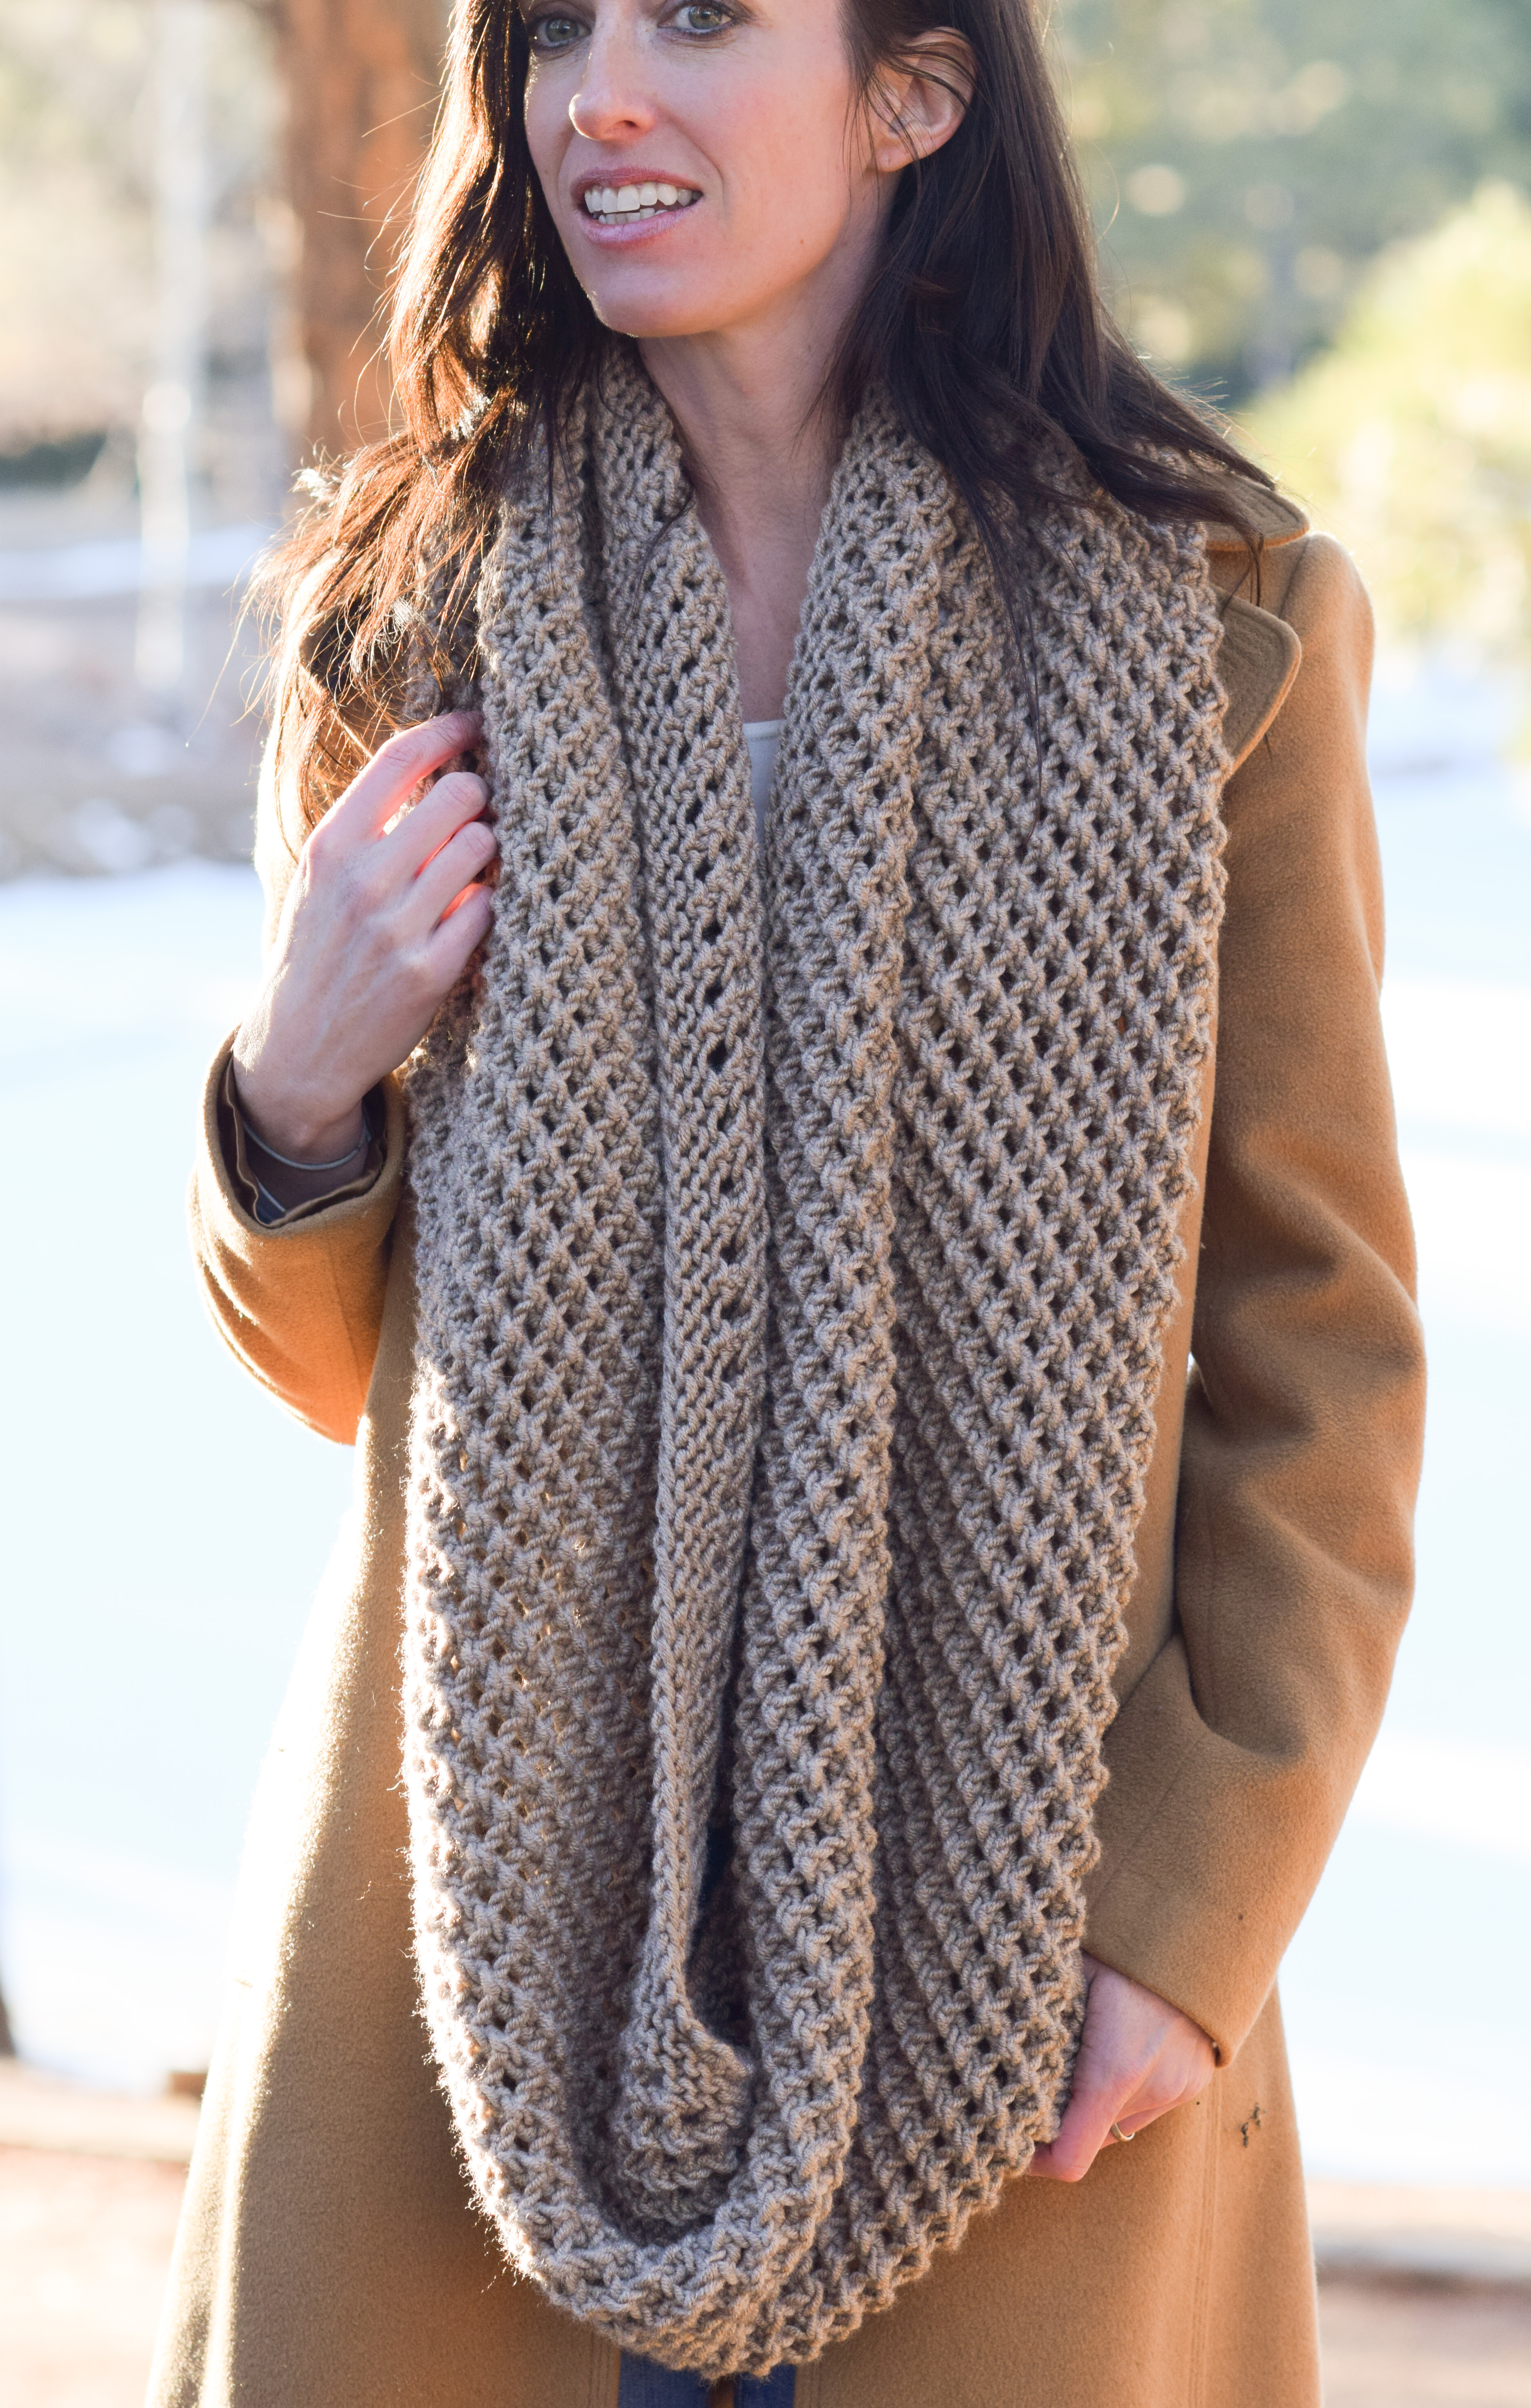 Knitted Scarves: Making You Look Beautiful